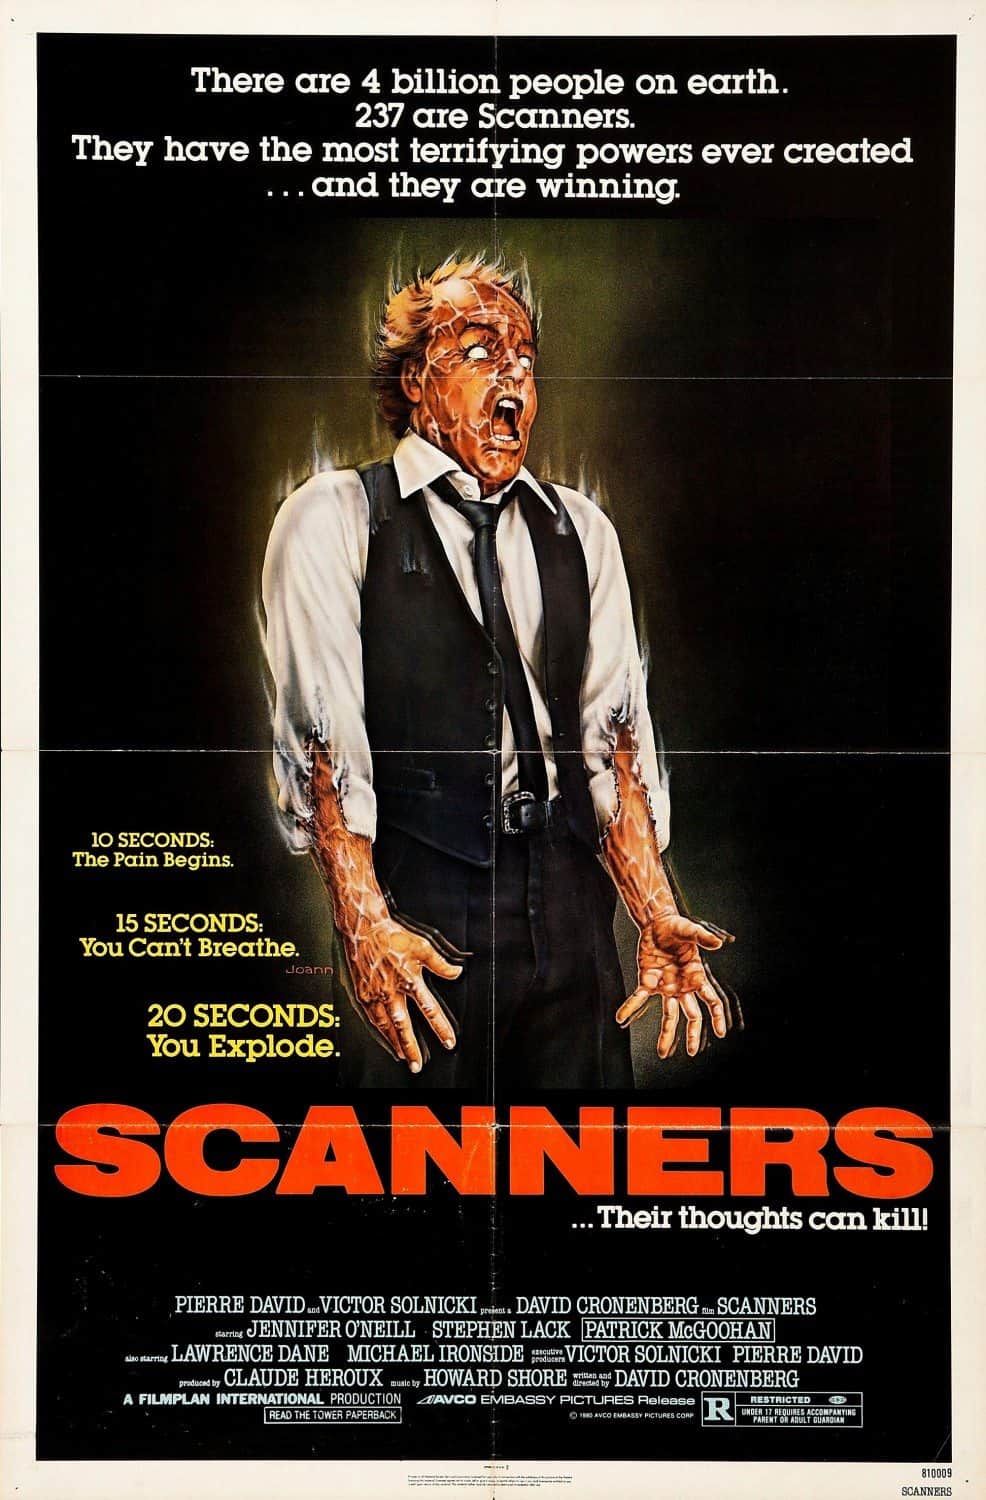 Horror Movie Review: Scanners (1981)